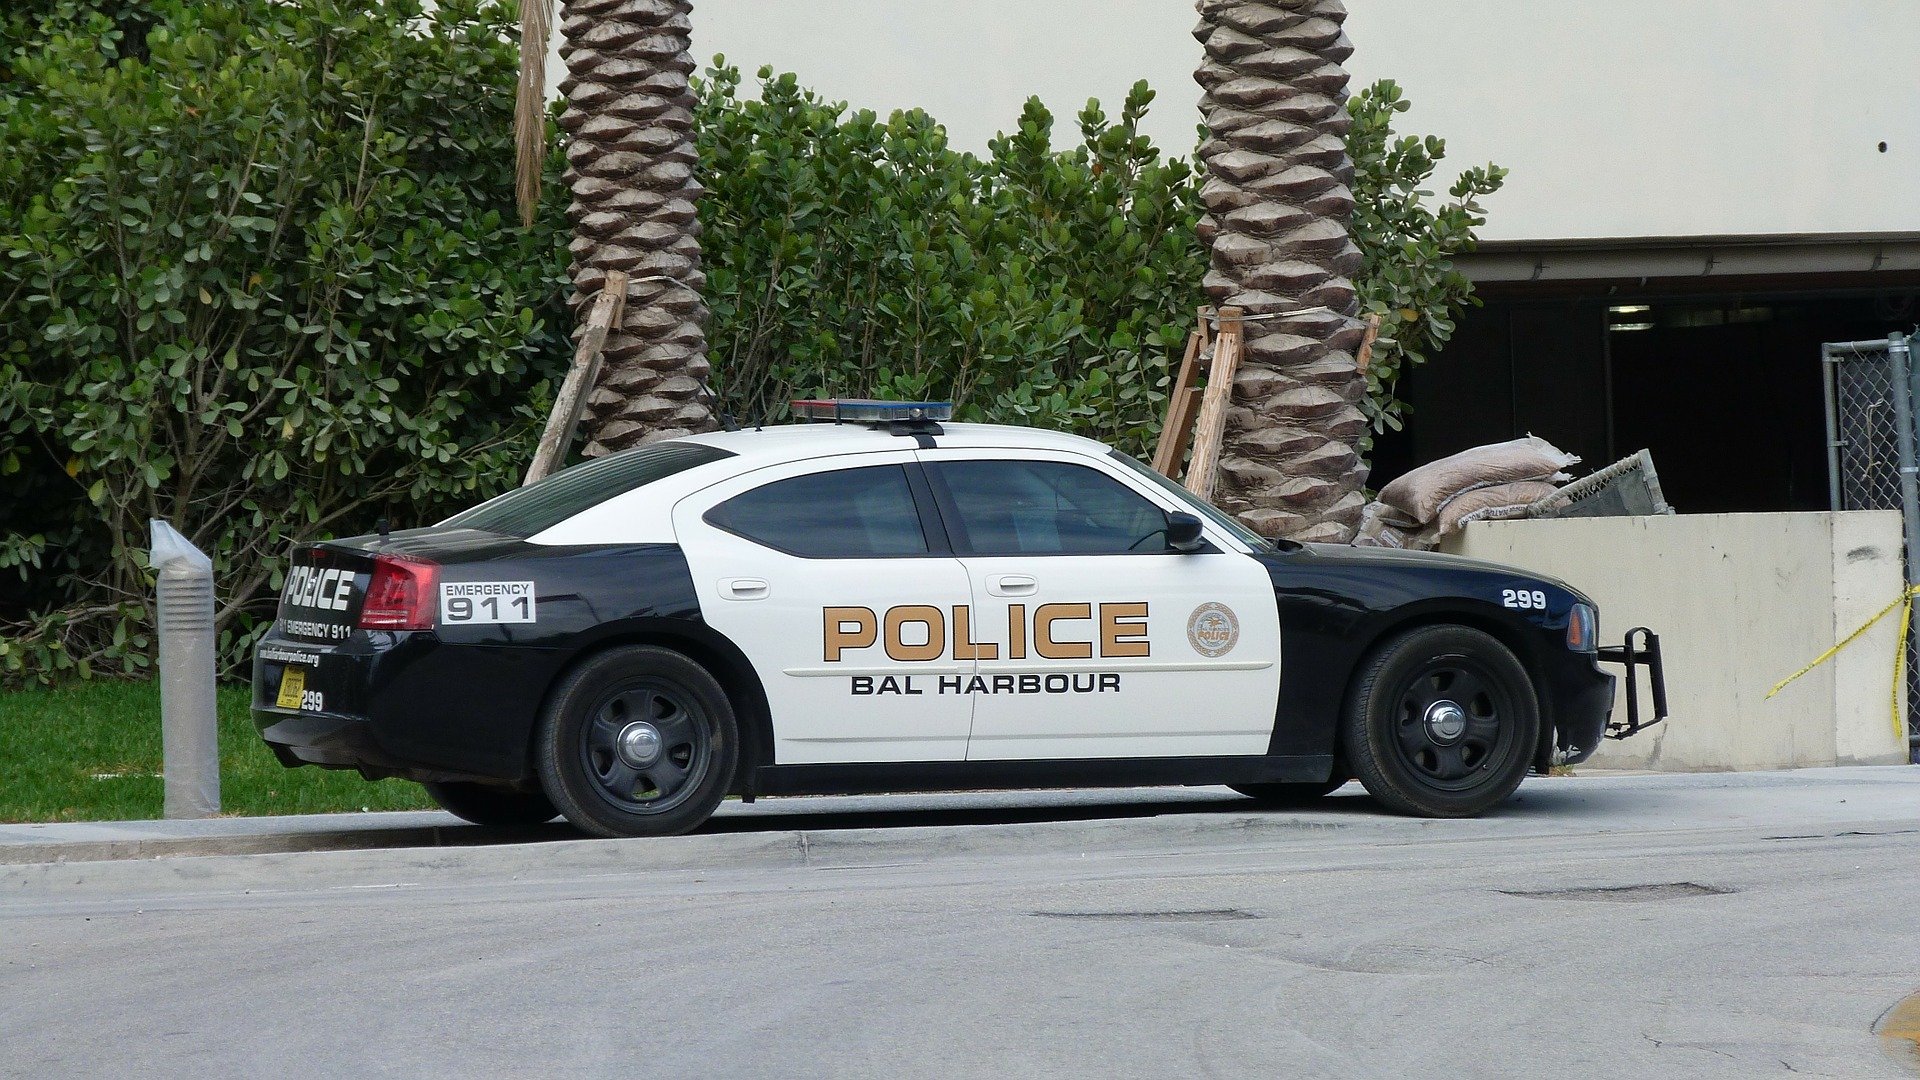 Pictured - Miami police vehicle | Source: Pixabay 